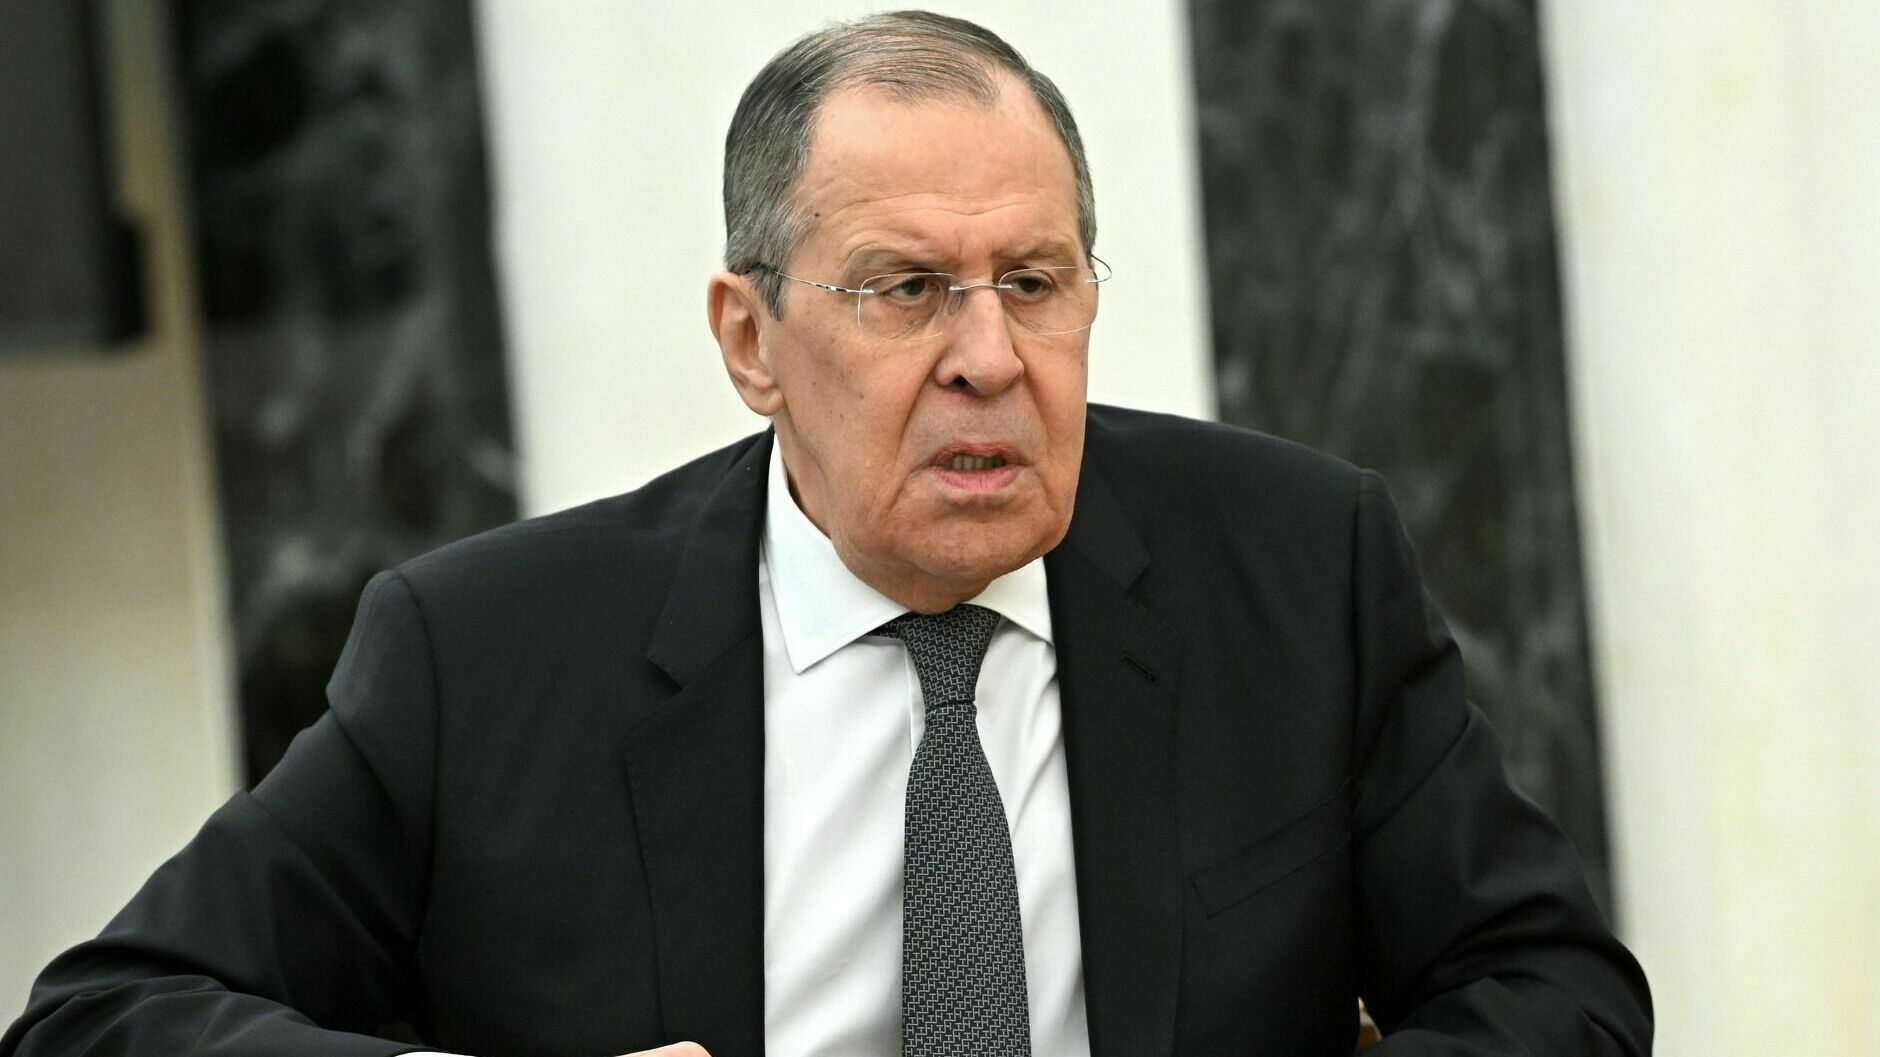 Lavrov promised to prevent the West from "blowing up gas pipelines" again